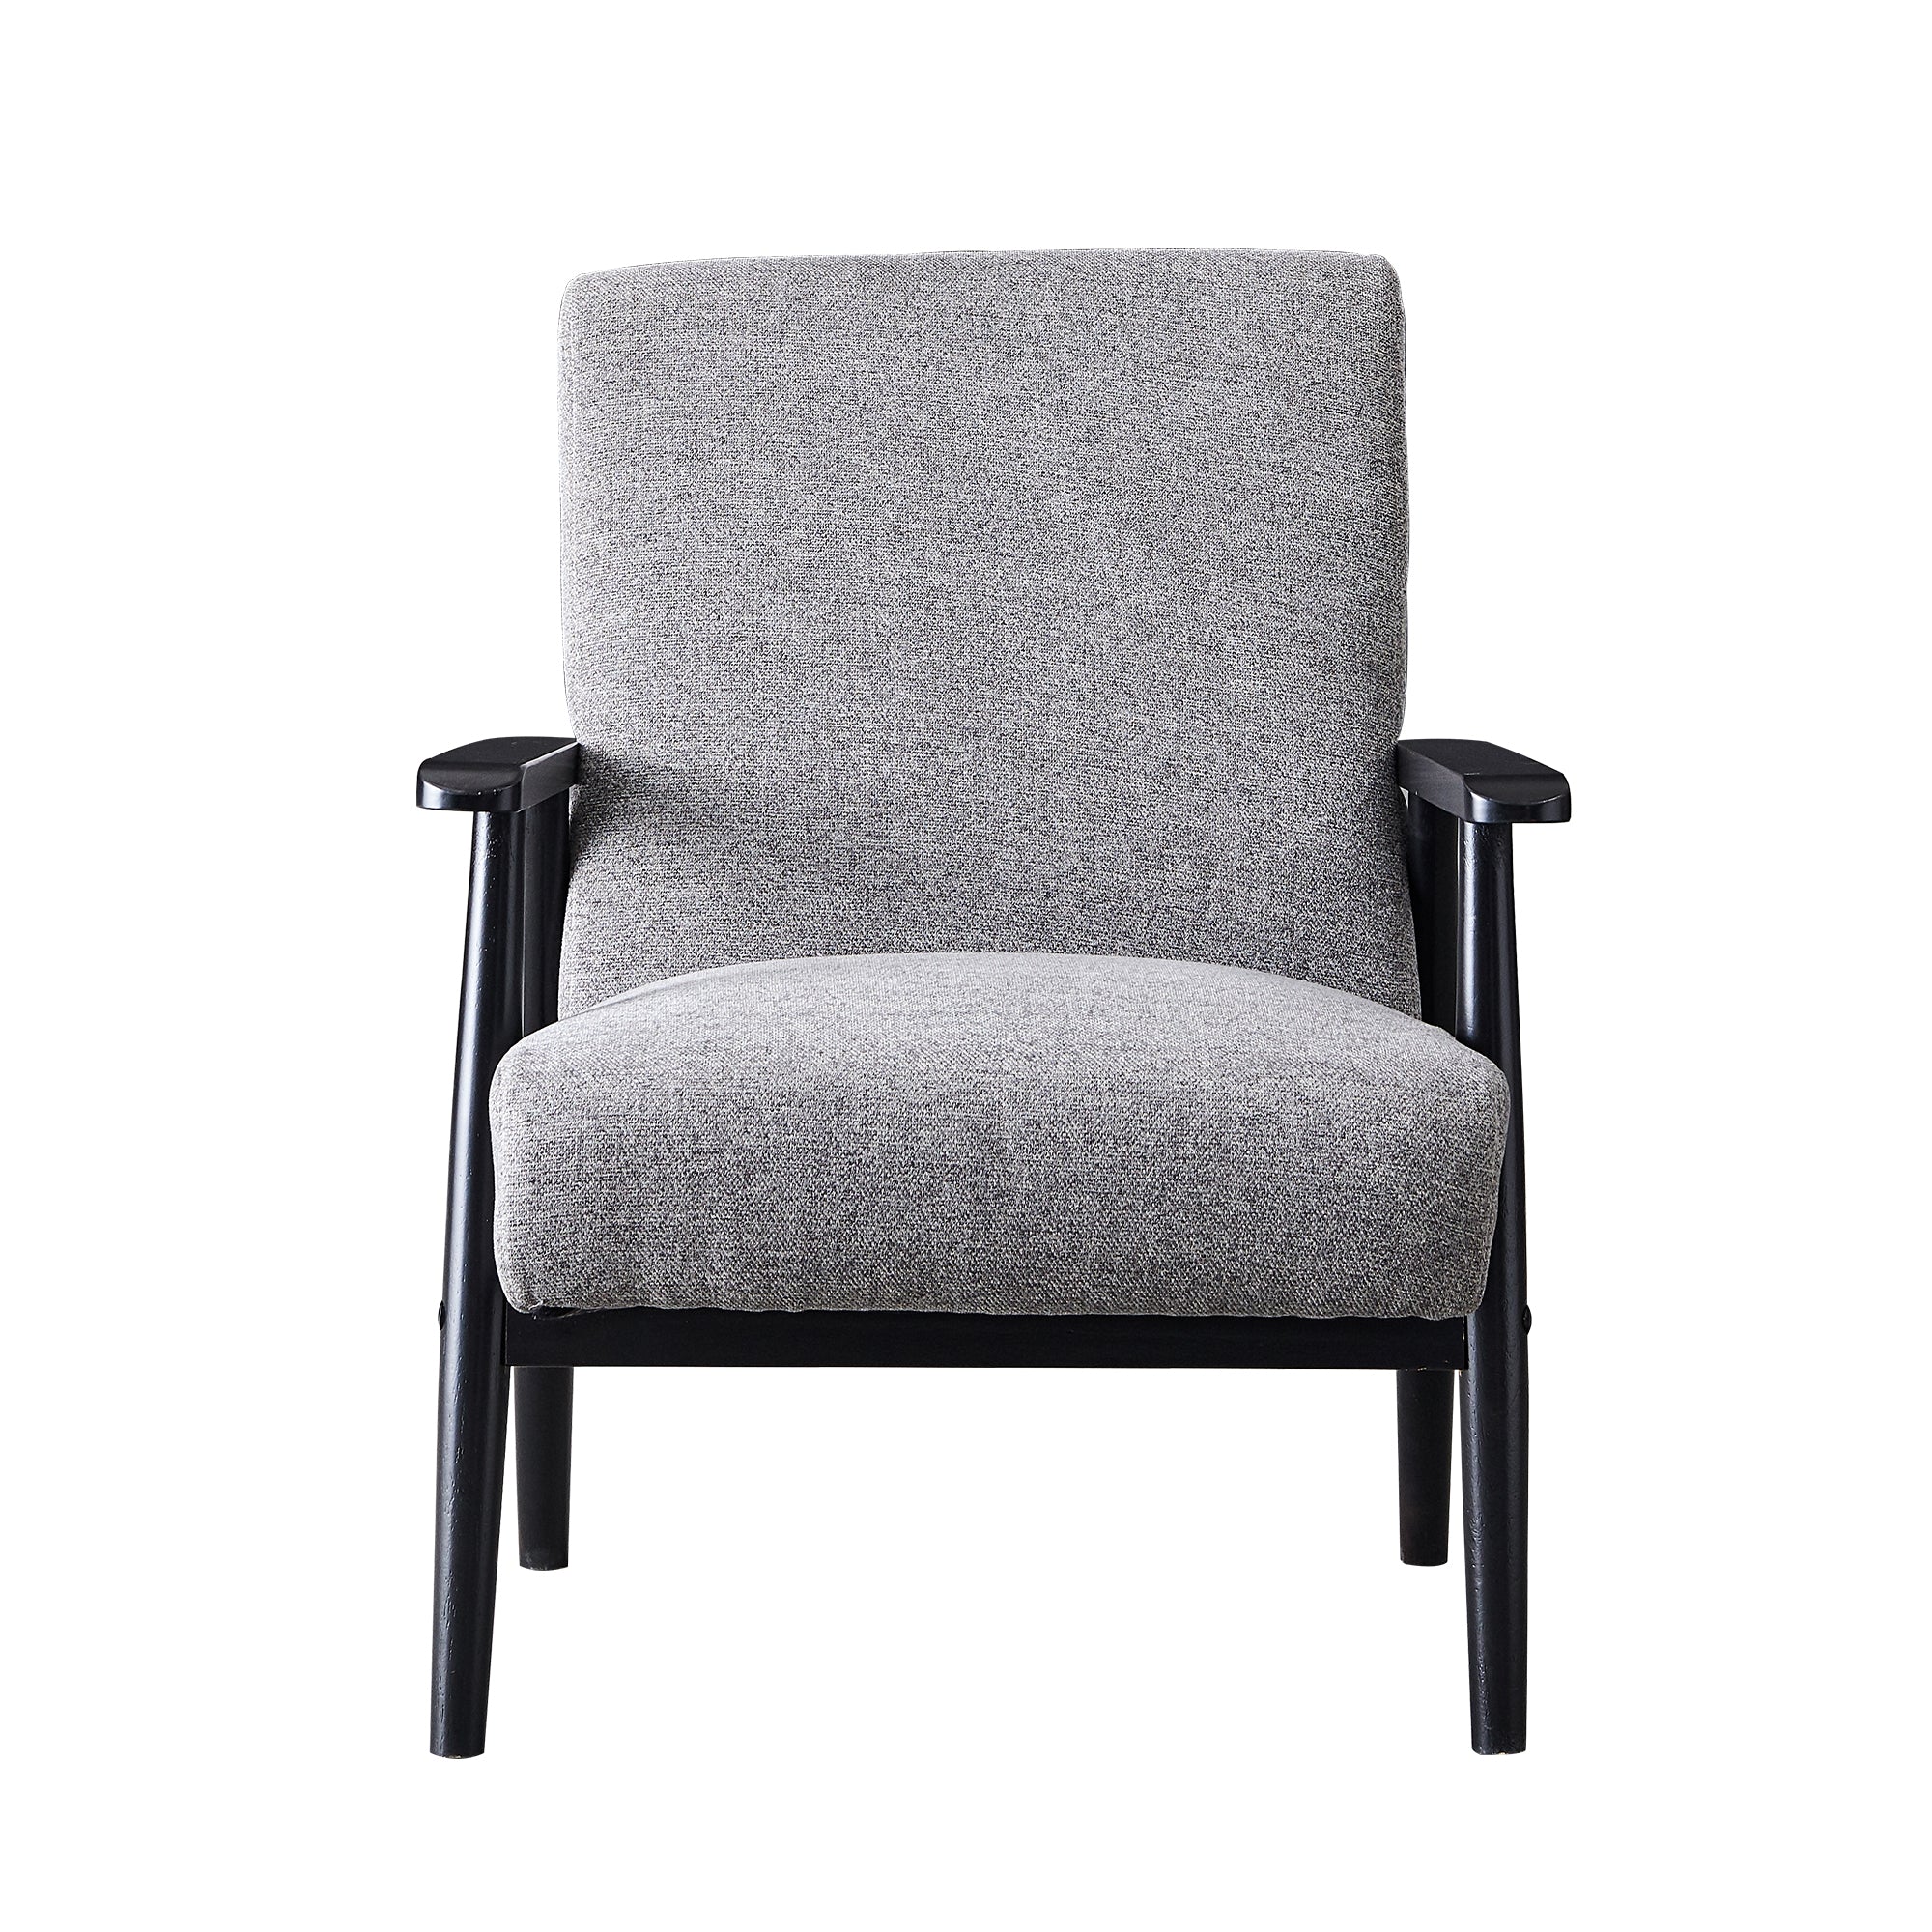 Gray Mid -century arm chair with Thick Sponge Seat-Boyel Living